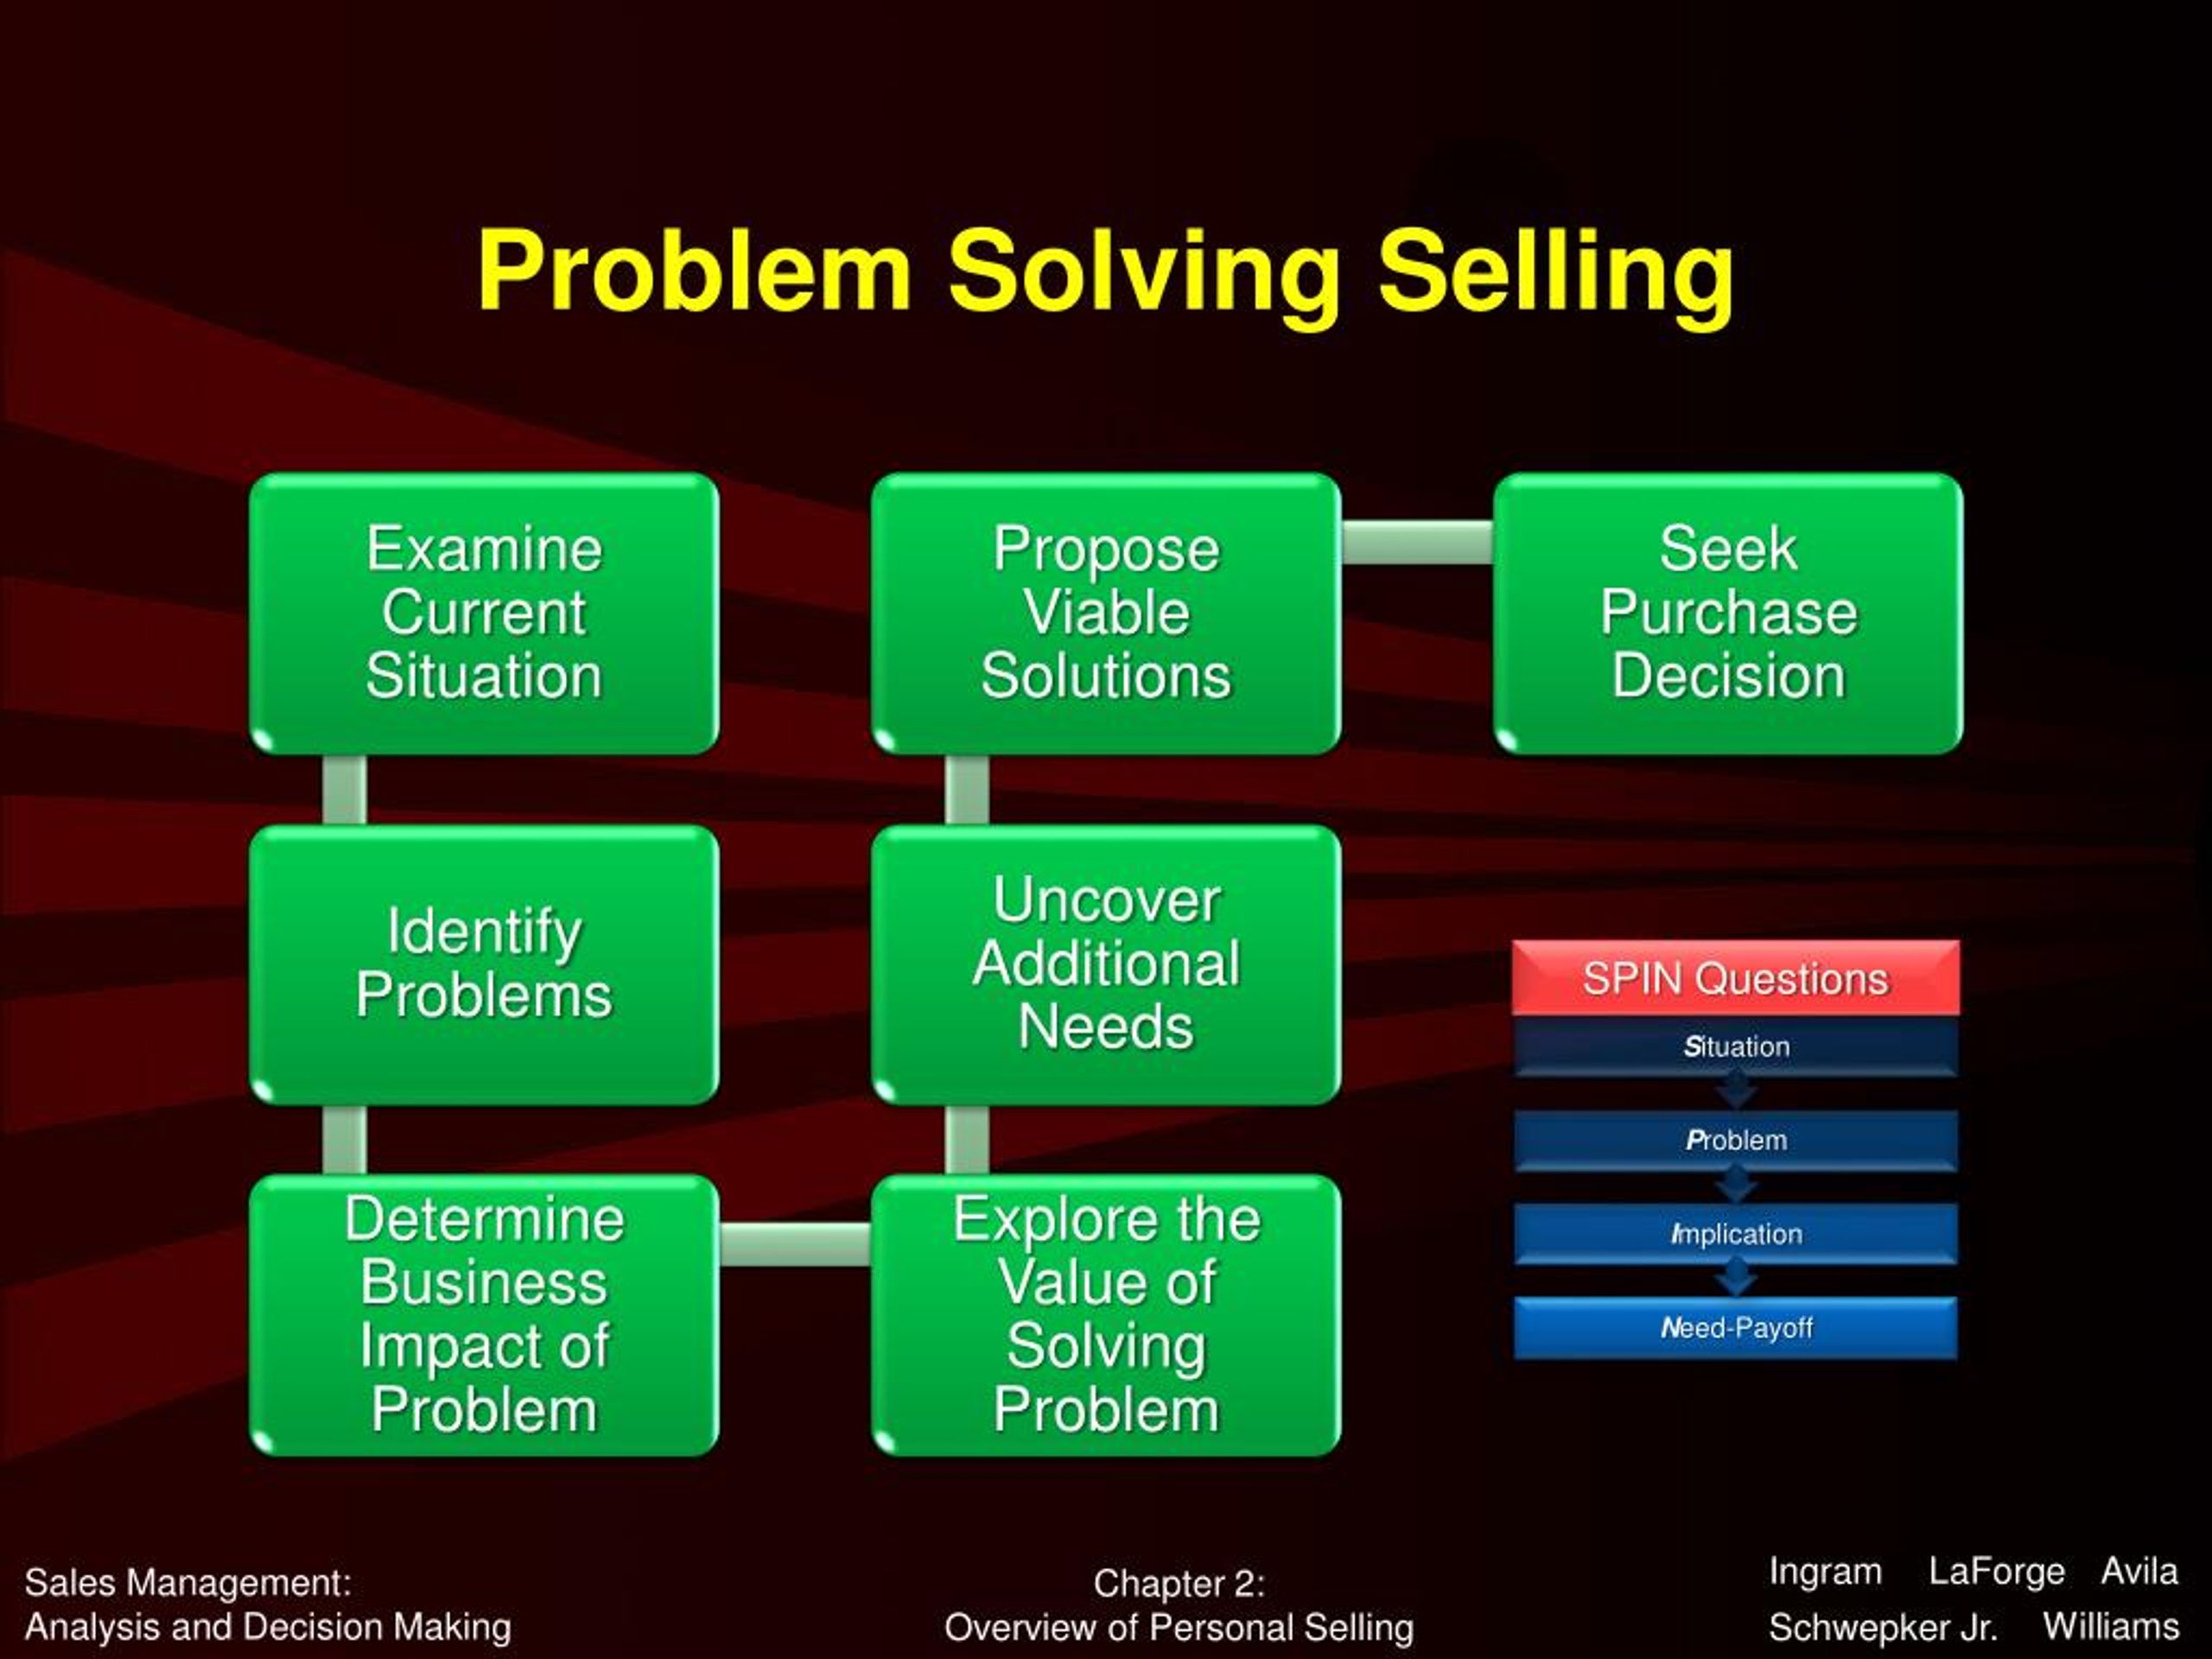 what is the relationship between problem solving and selling